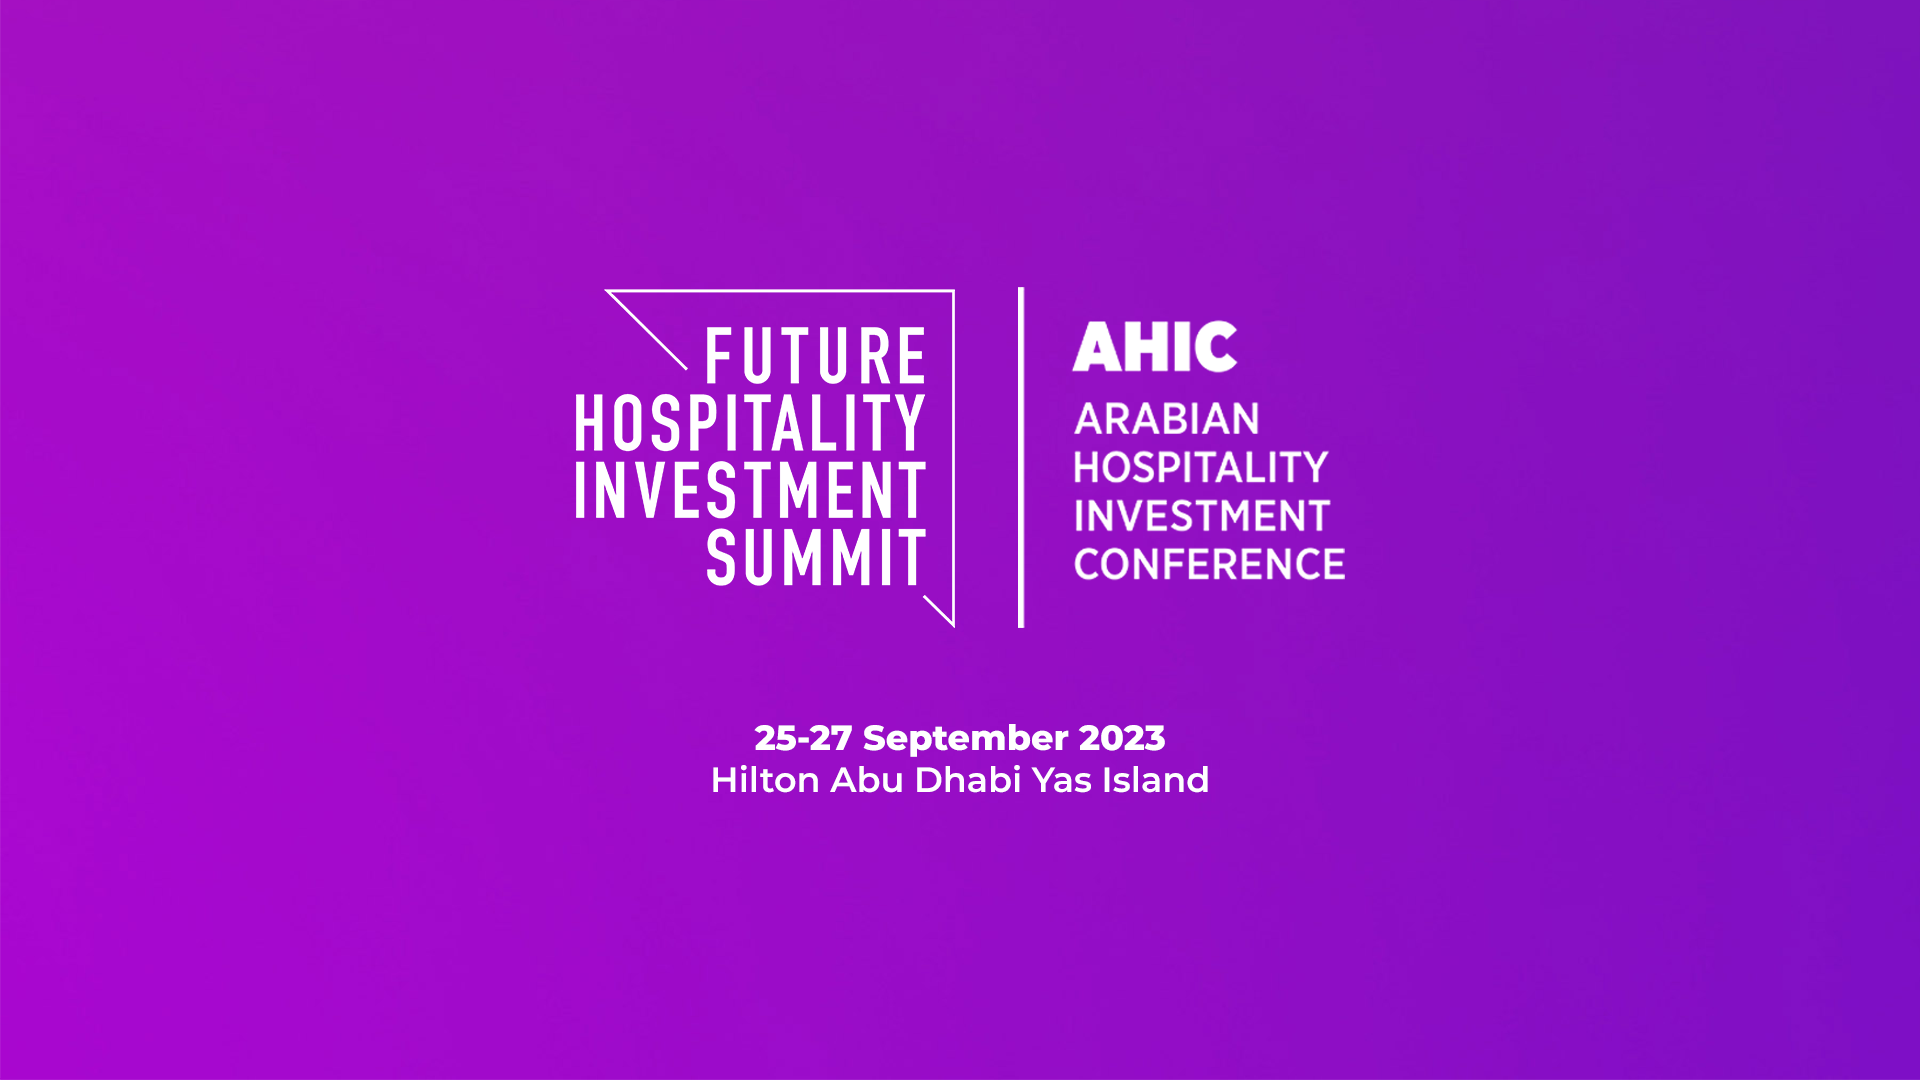 AHIC at FHIS 2023